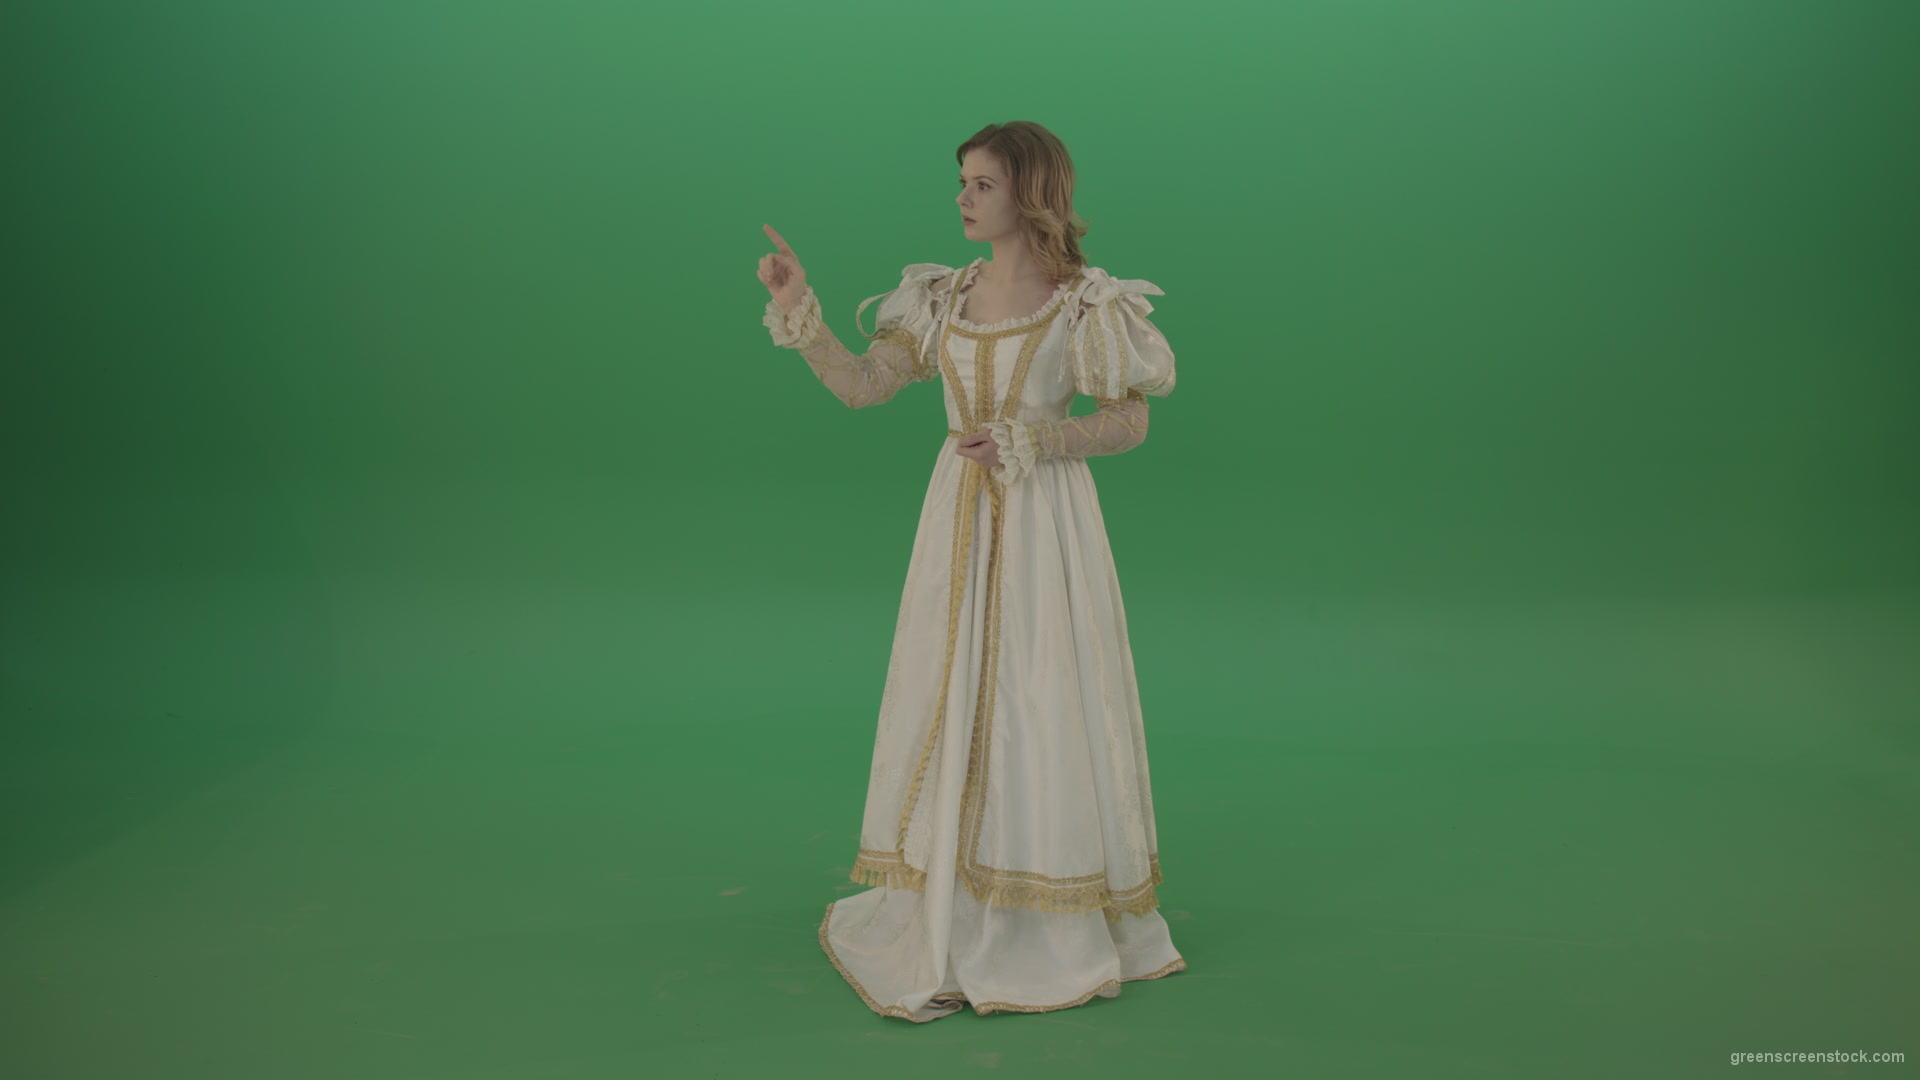 Flips-the-touchscreen-princess-in-a-white-dress-isolated-on-green-screen_009 Green Screen Stock